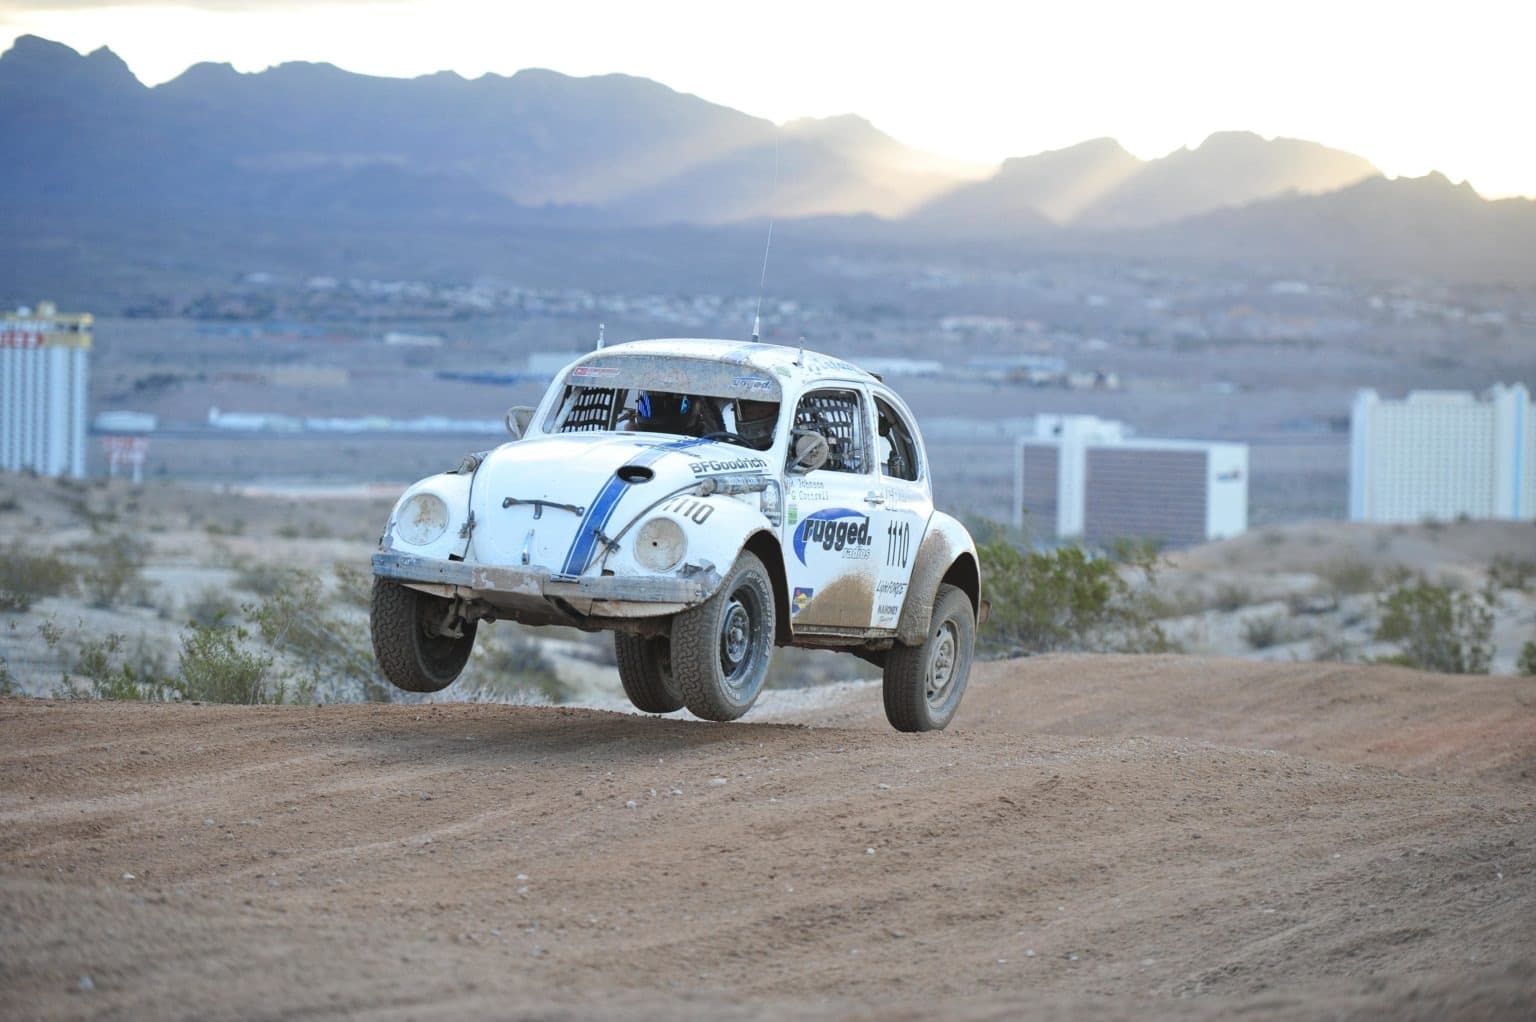 A VW Bettle racing on a dirt track.